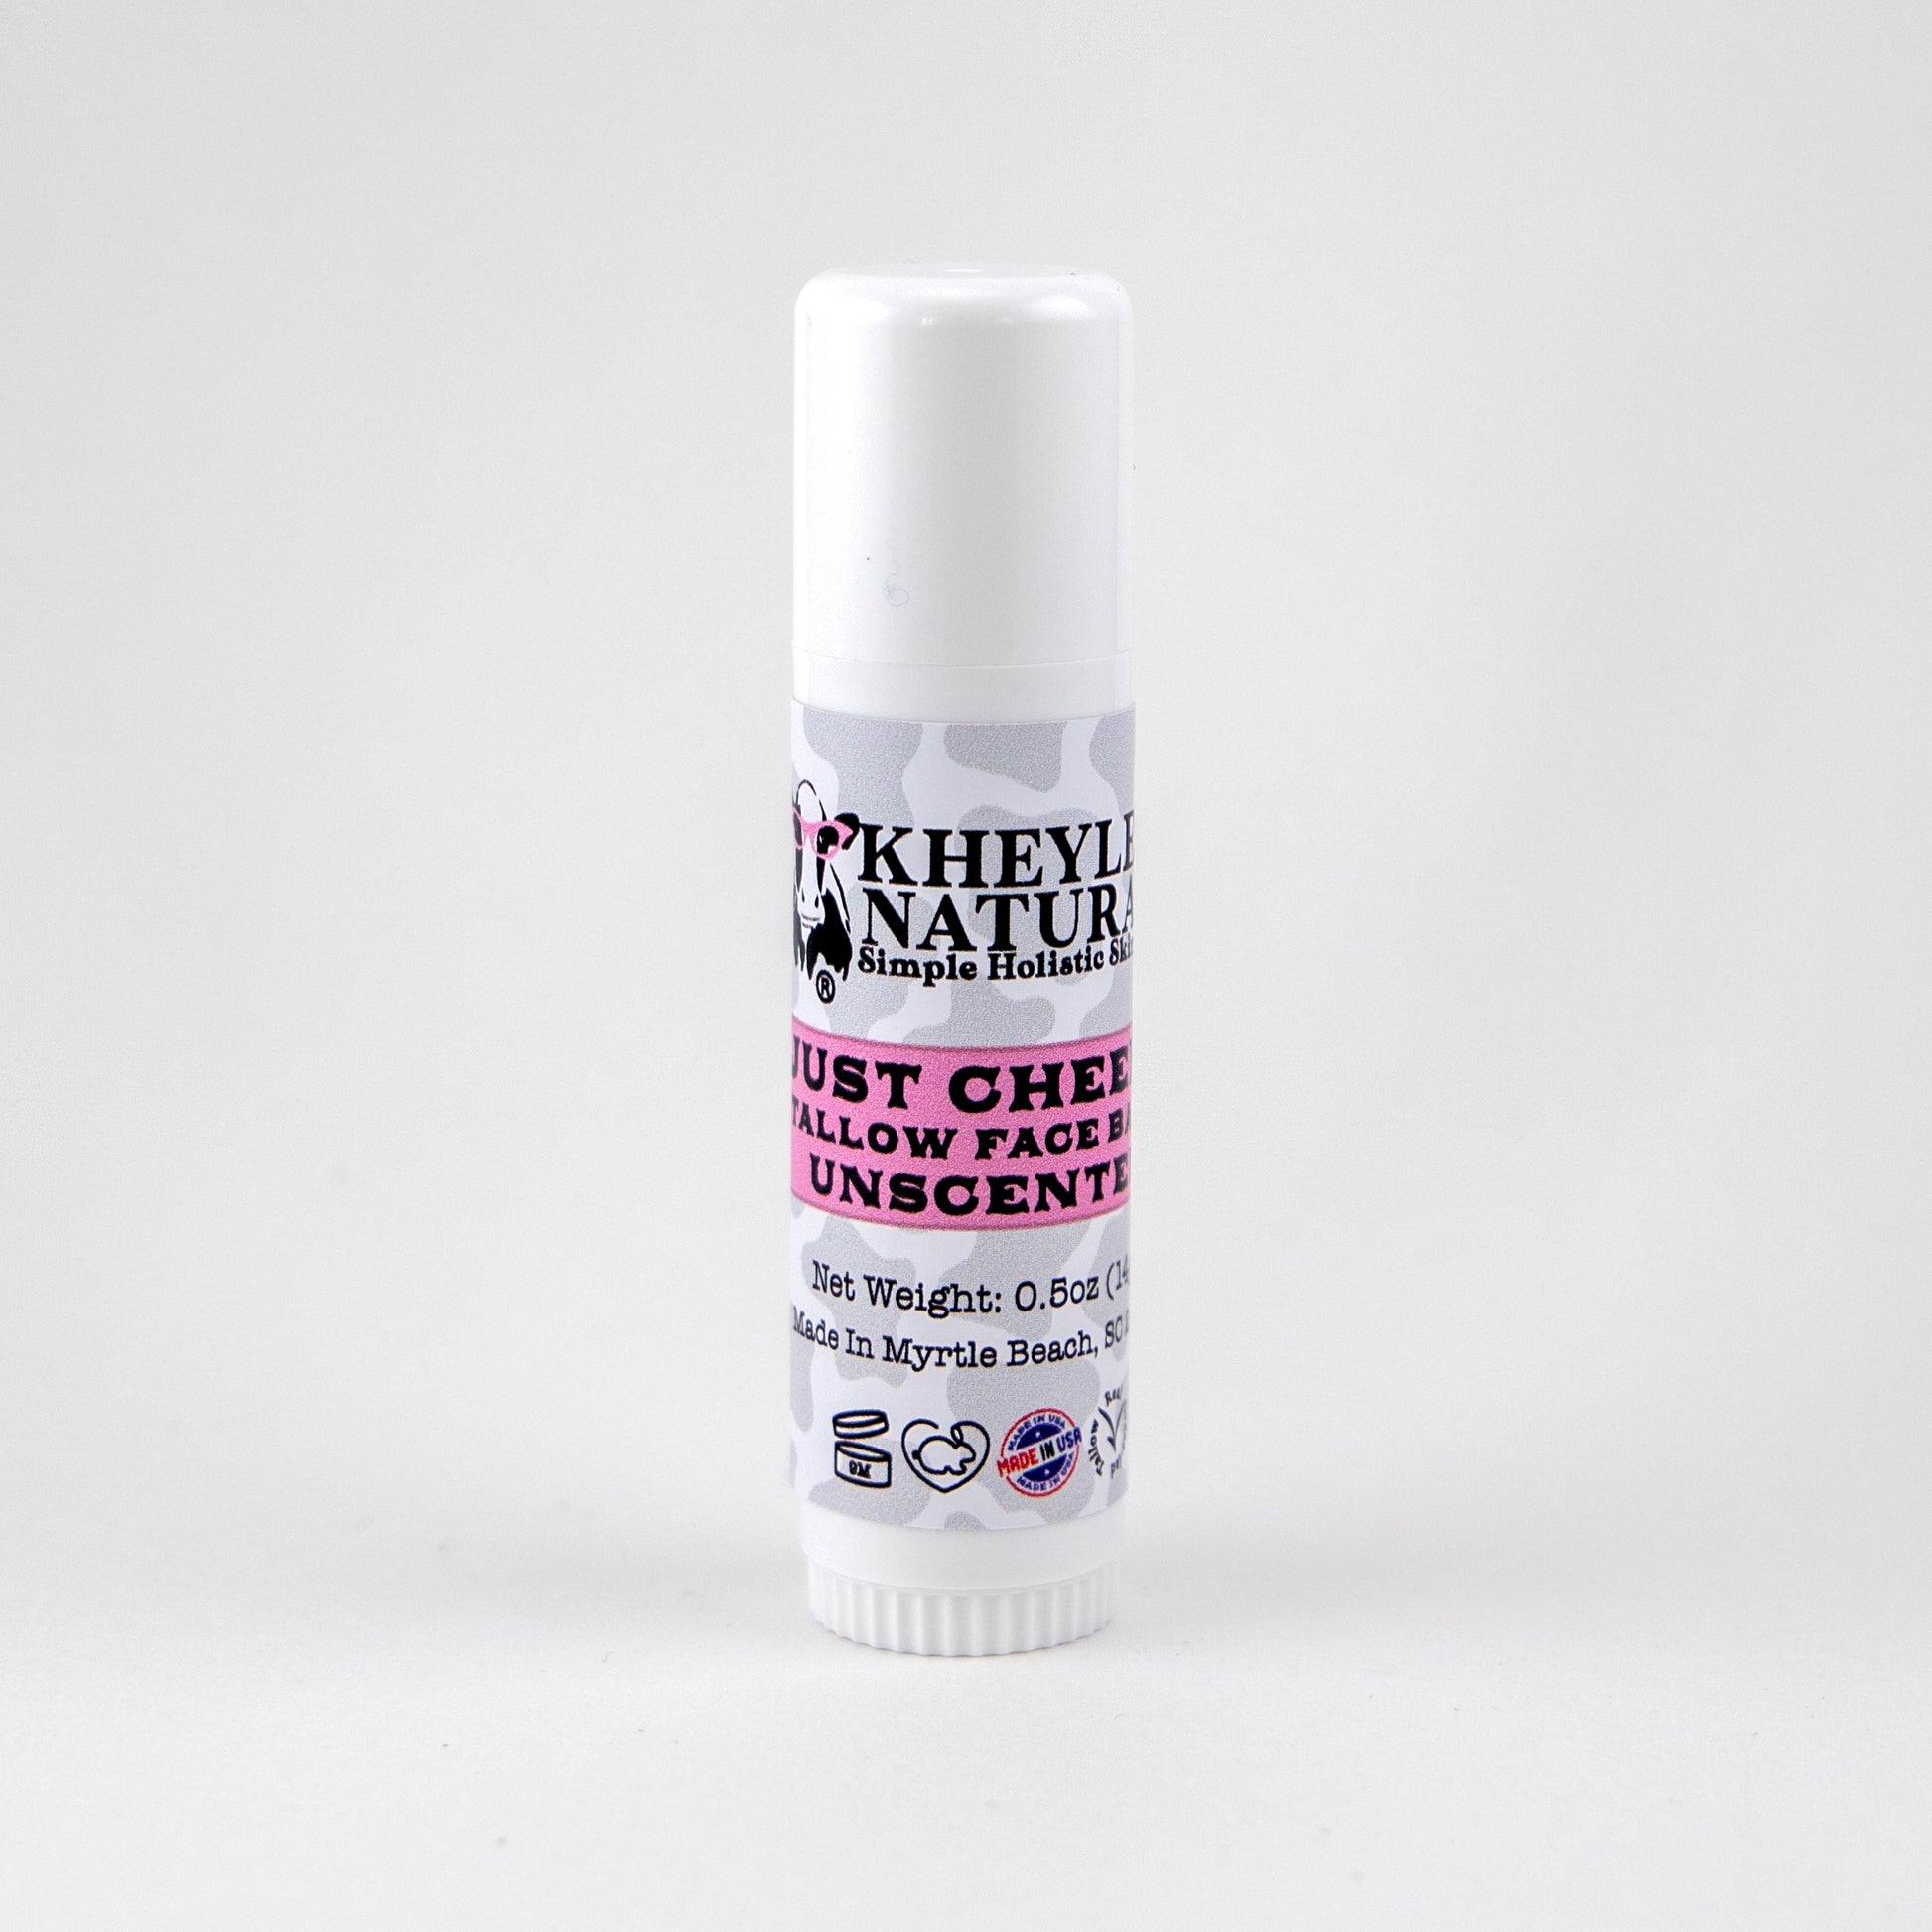 Just Cheeky is a multi-purpose tallow balm great for chapped skin or eczema.